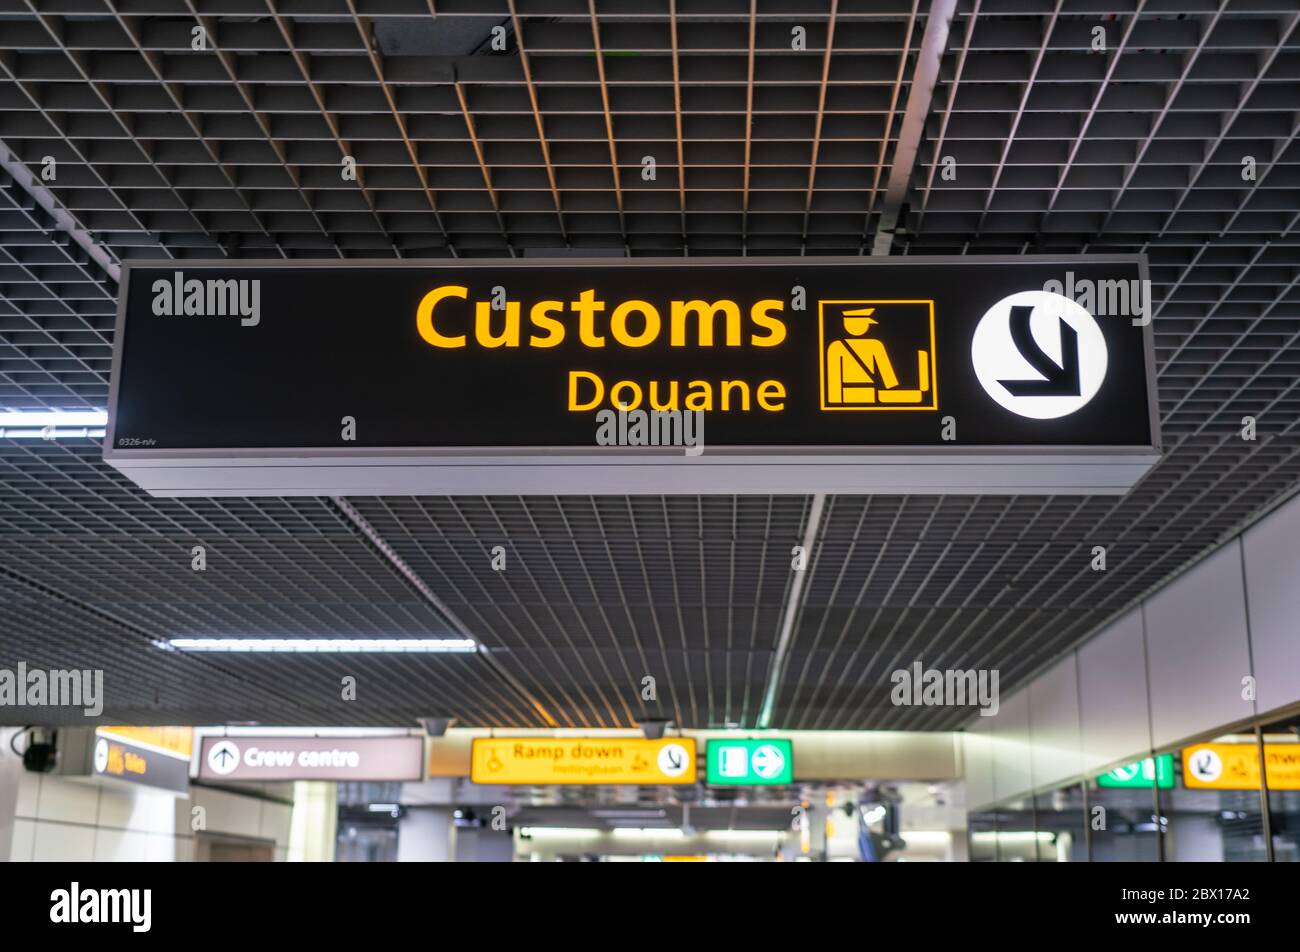 Customs sign at Schiphol international airport poiting passenergs to the customs area Stock Photo